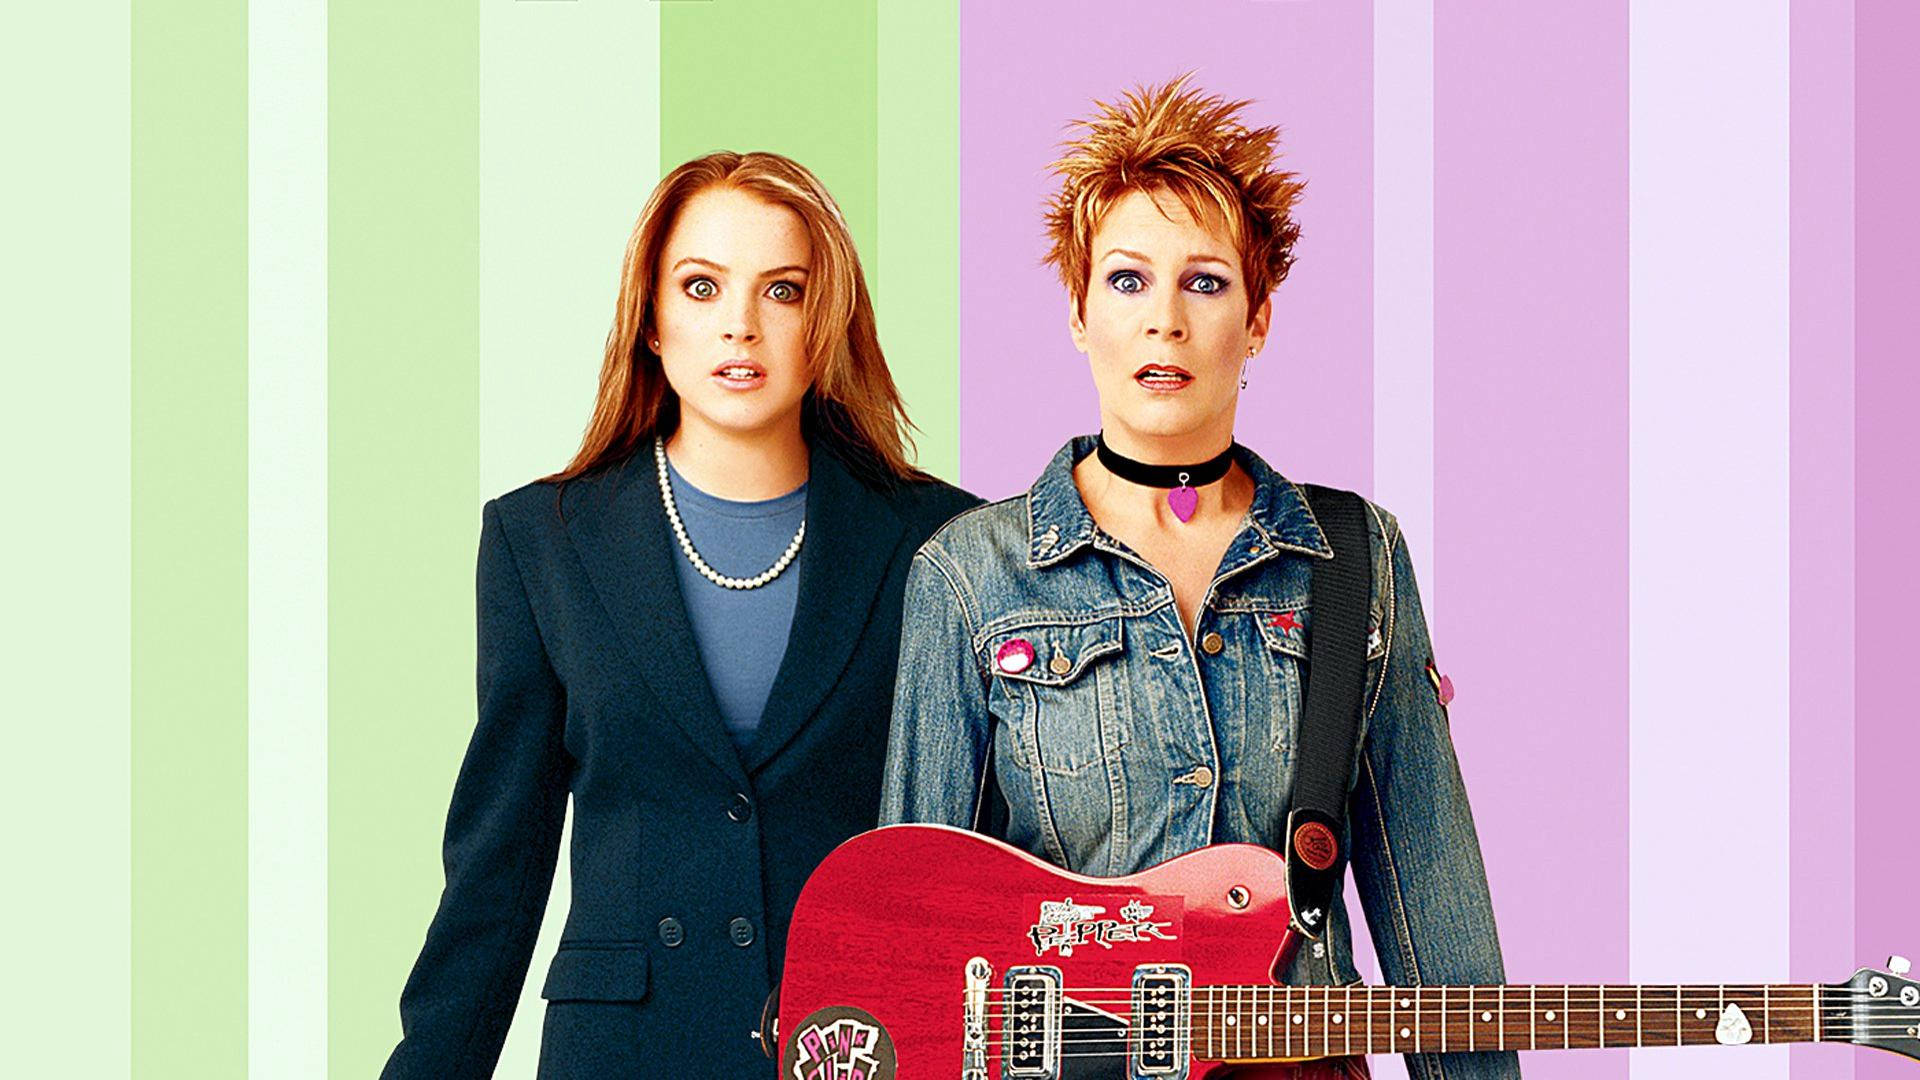 Freaky Friday Textless Poster Background